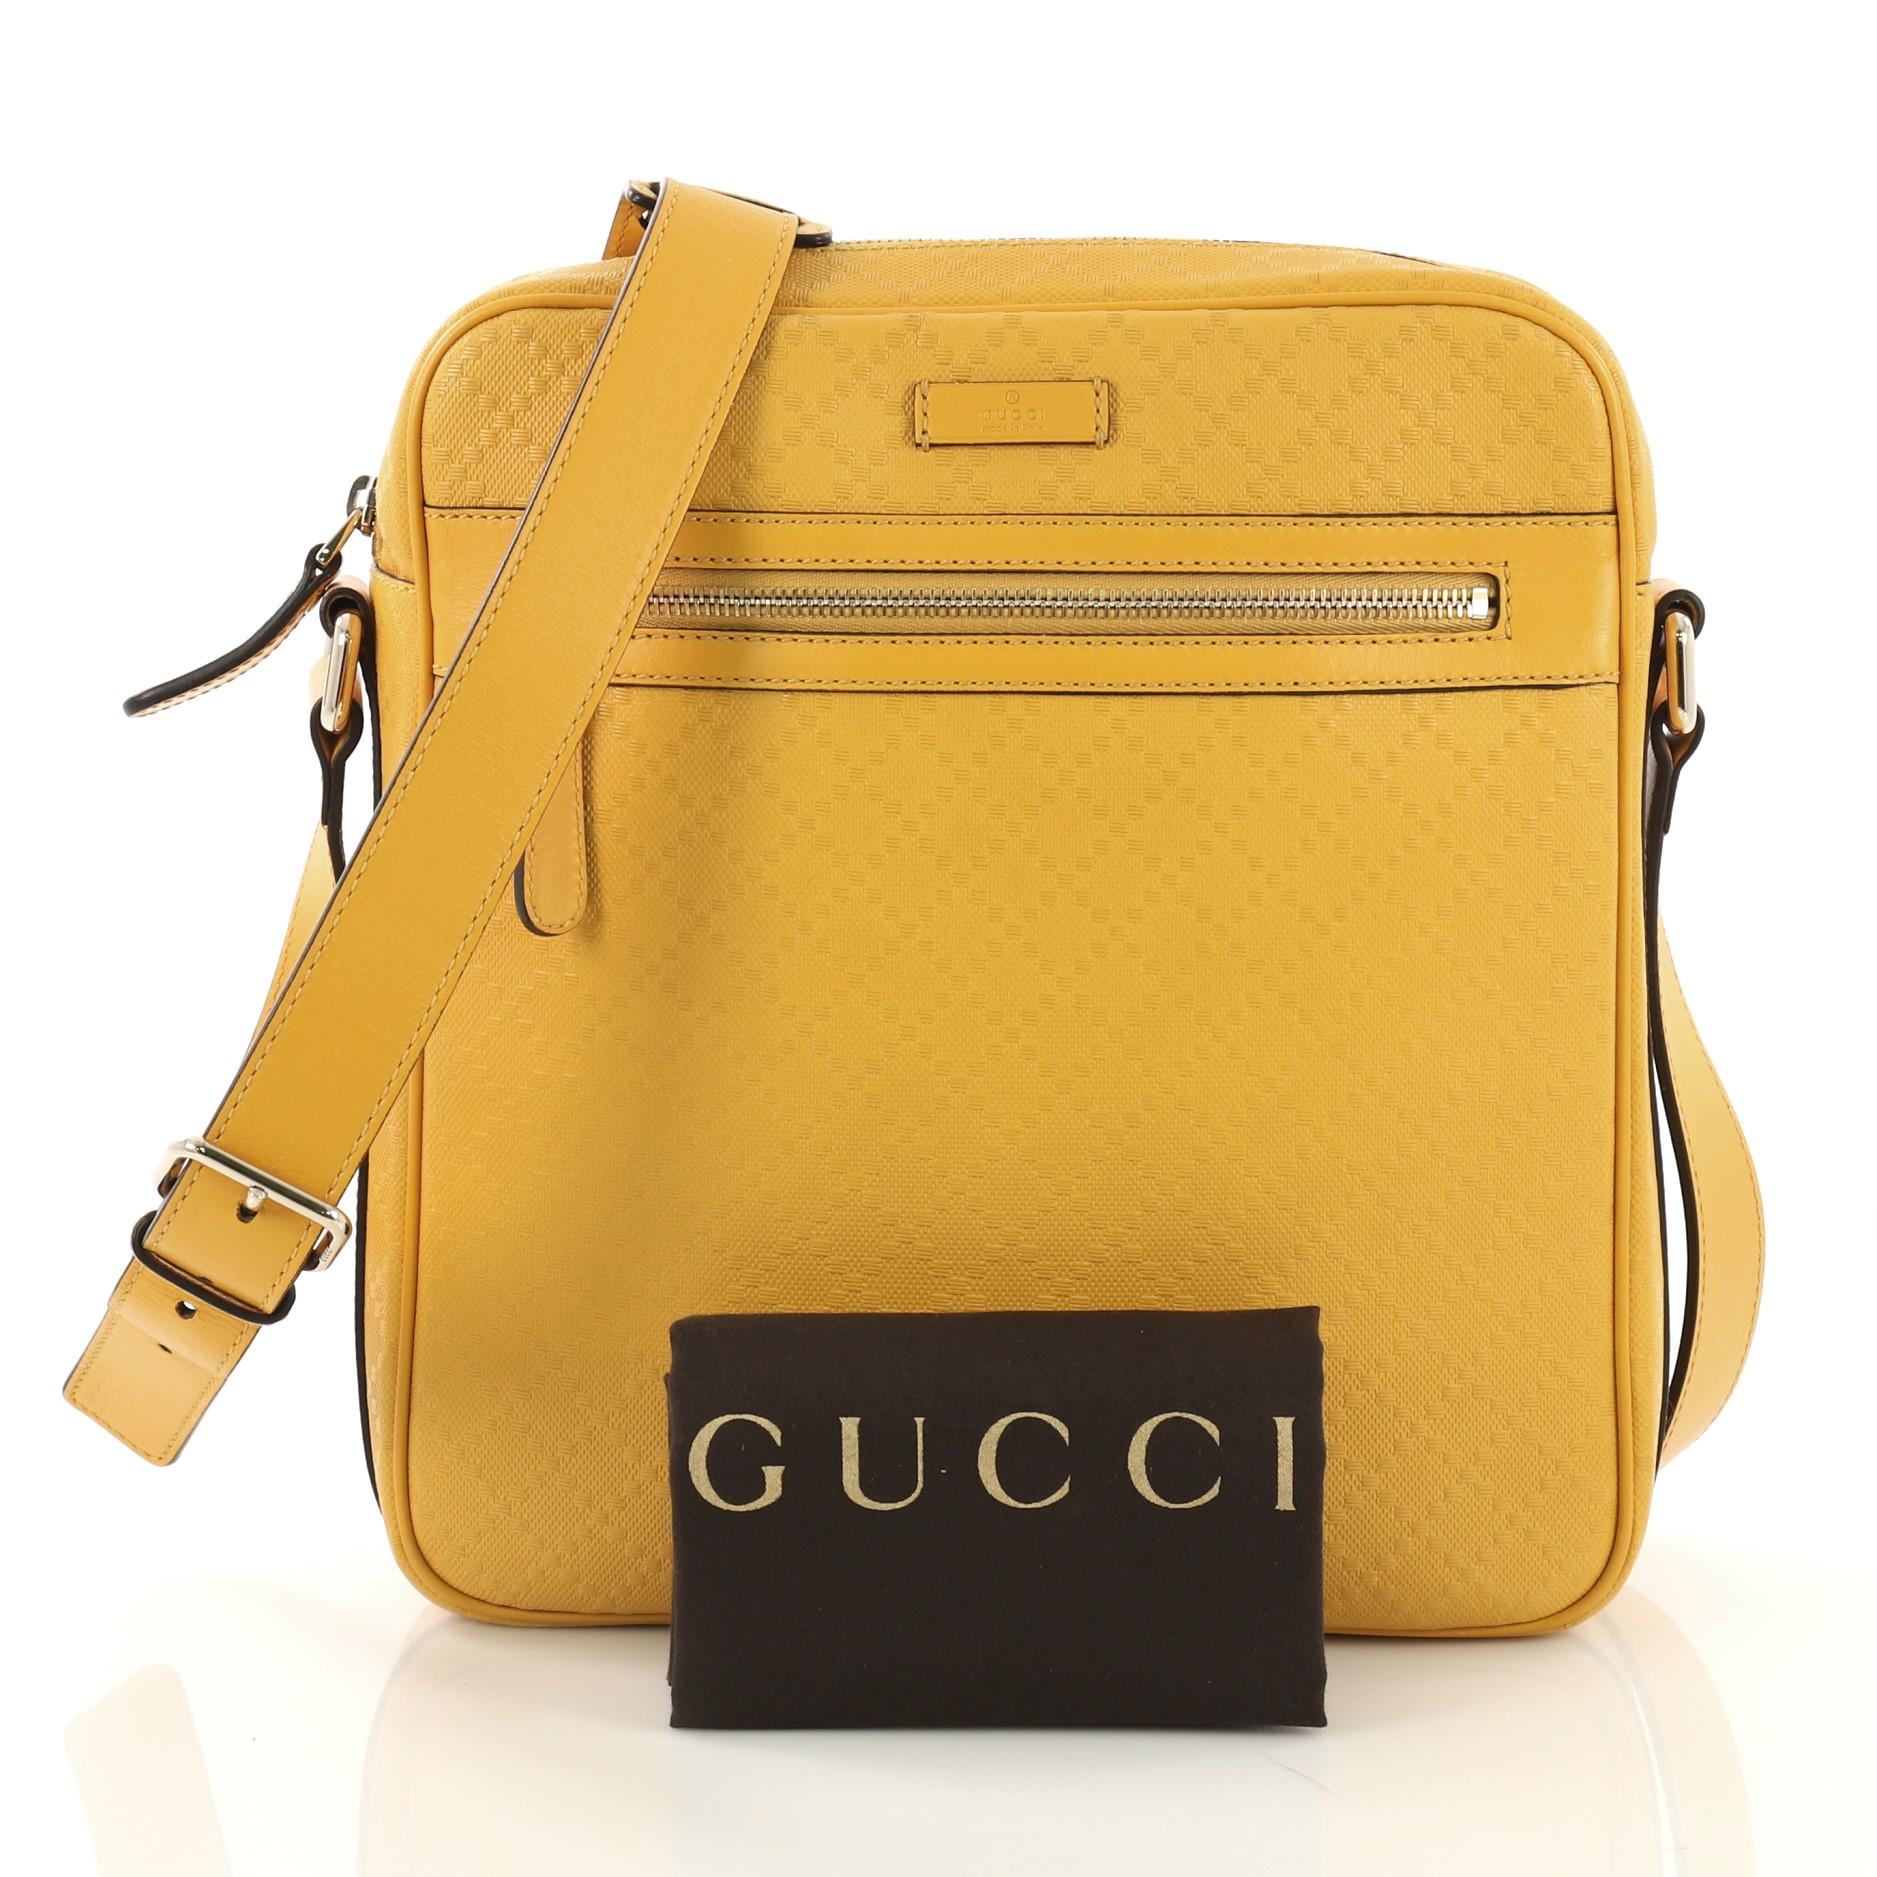 This Gucci Front Zip Messenger Diamante Leather Medium, crafted in yellow diamante Leather, features an adjustable leather strap, leather trim, front zip pocket, and gold-tone hardware. Its top zip closure opens to a brown fabric interior with side